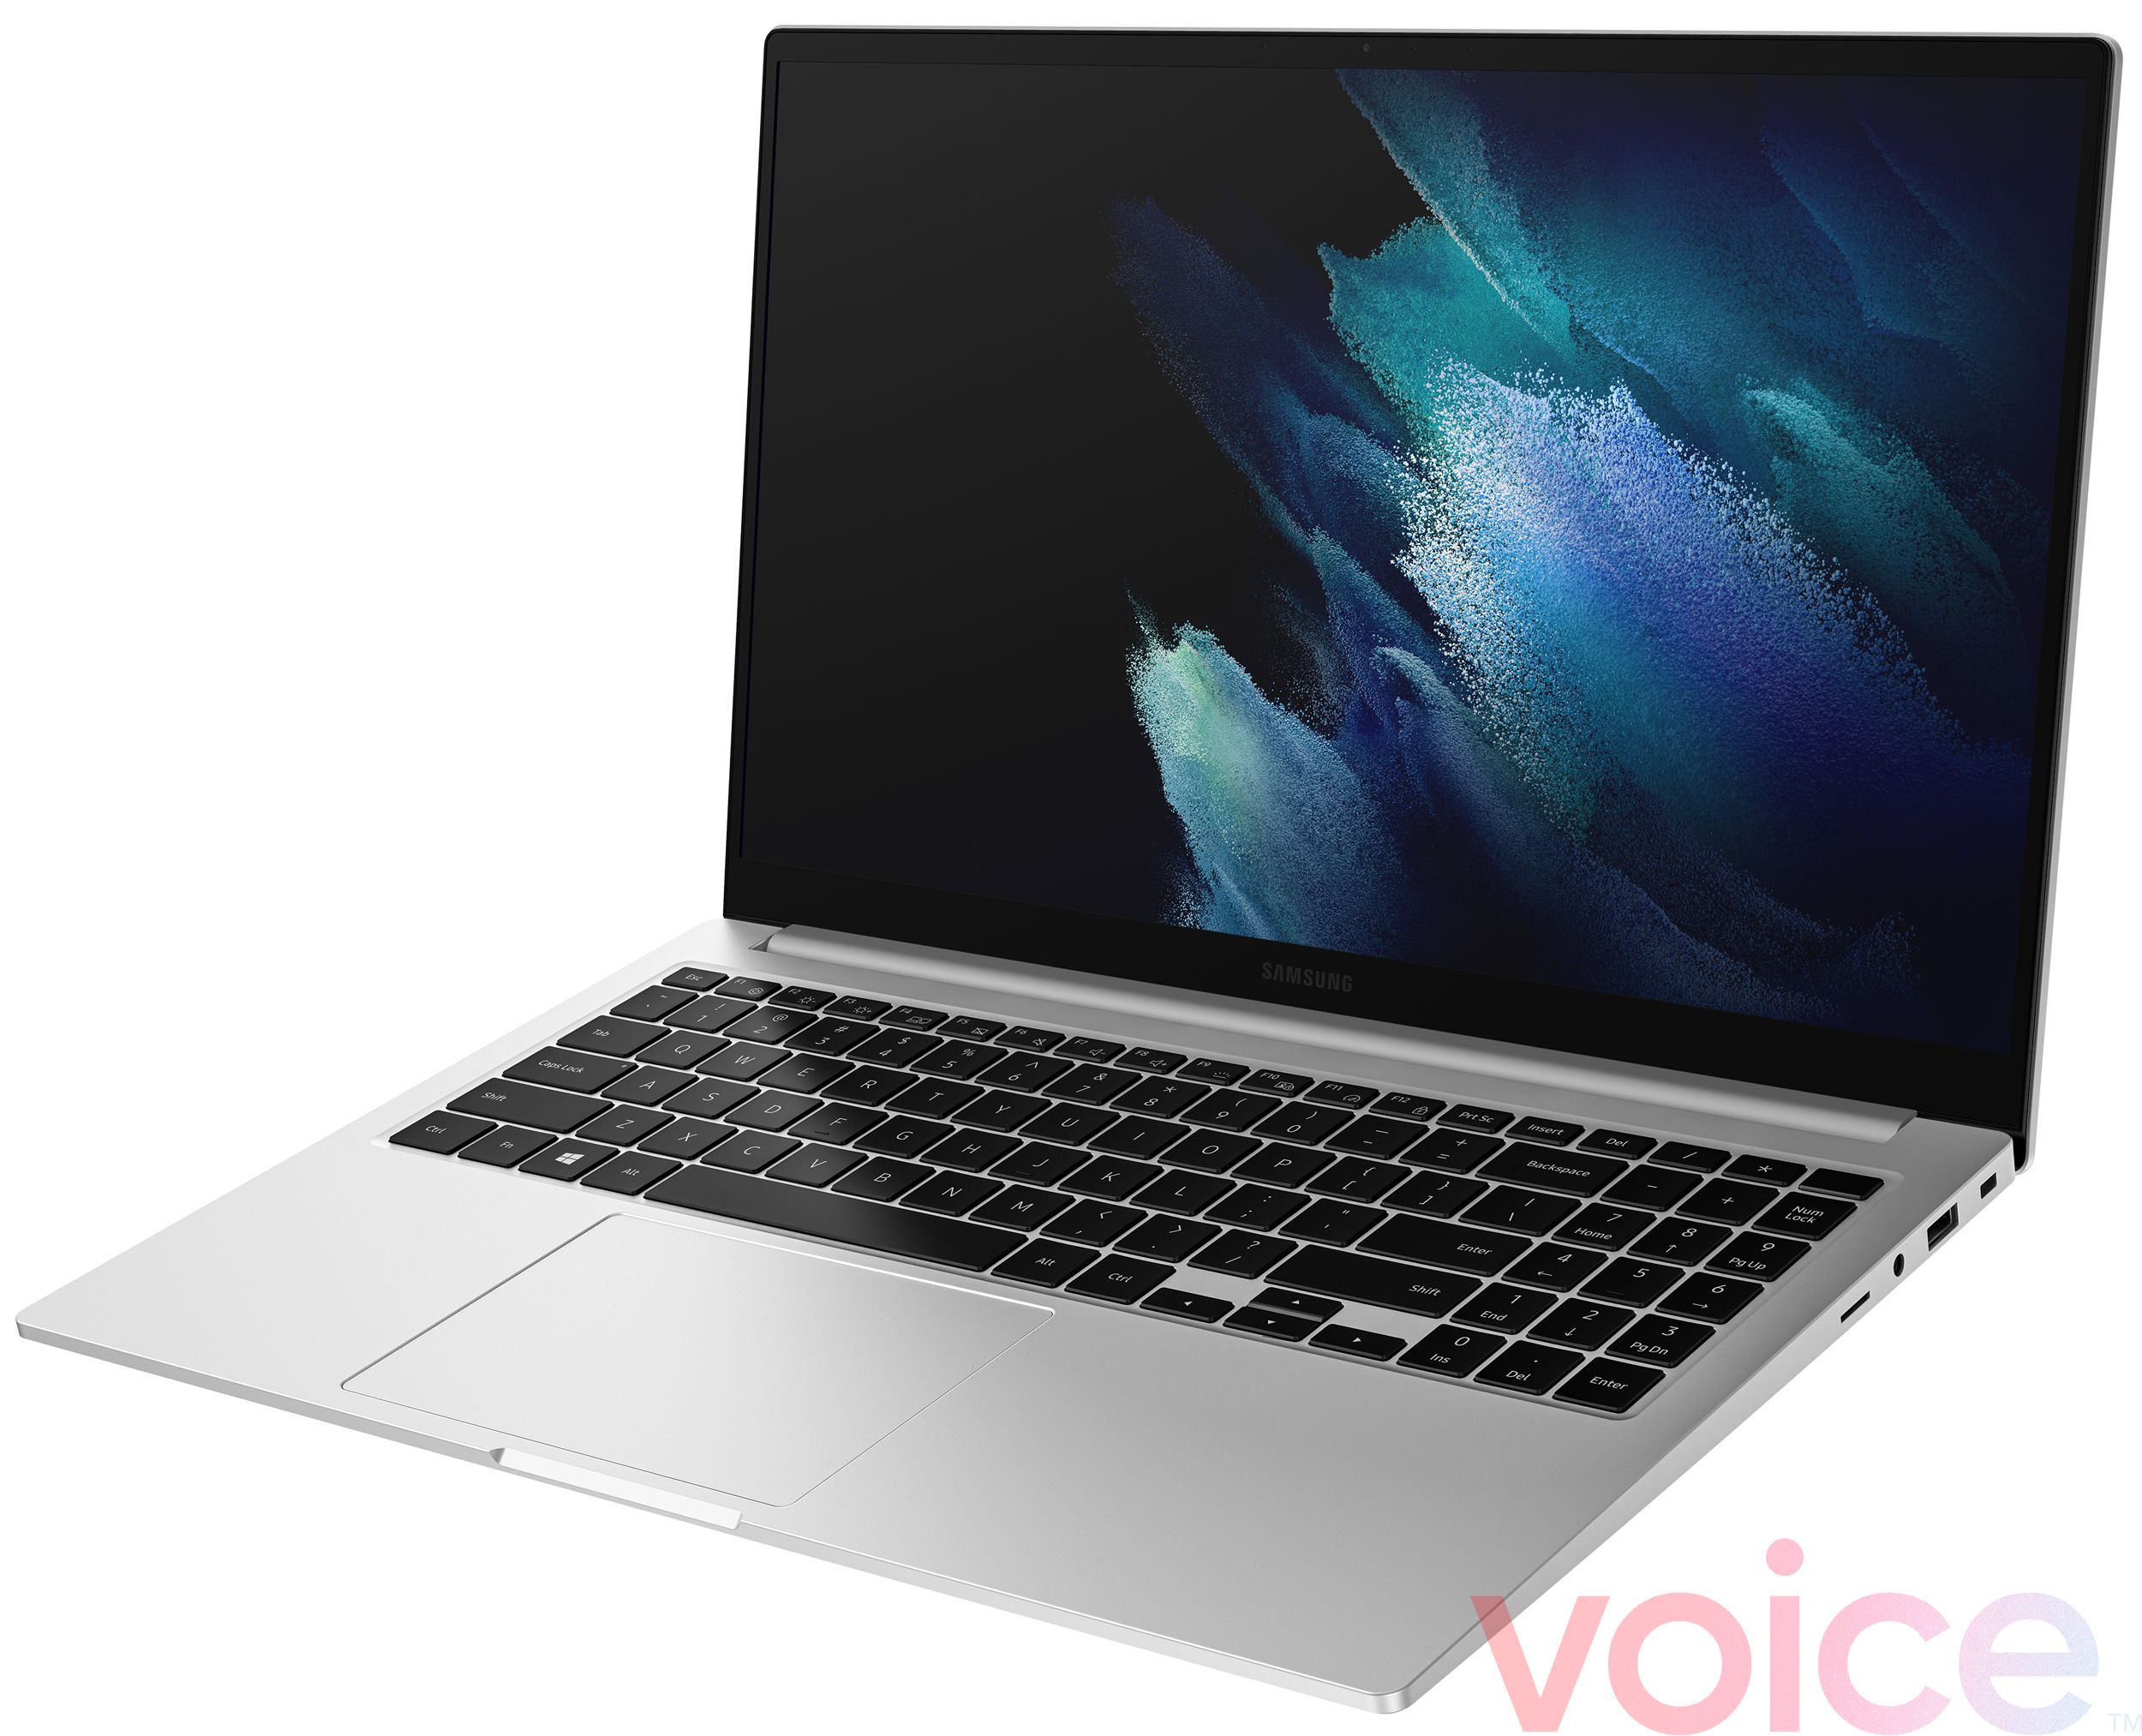 Samsung Galaxy Book leaks with a 15.6-inch touch screen, a digital buffer and a Tiger Lake Core i7 processor;  Thunderbolt 4 support may be missing